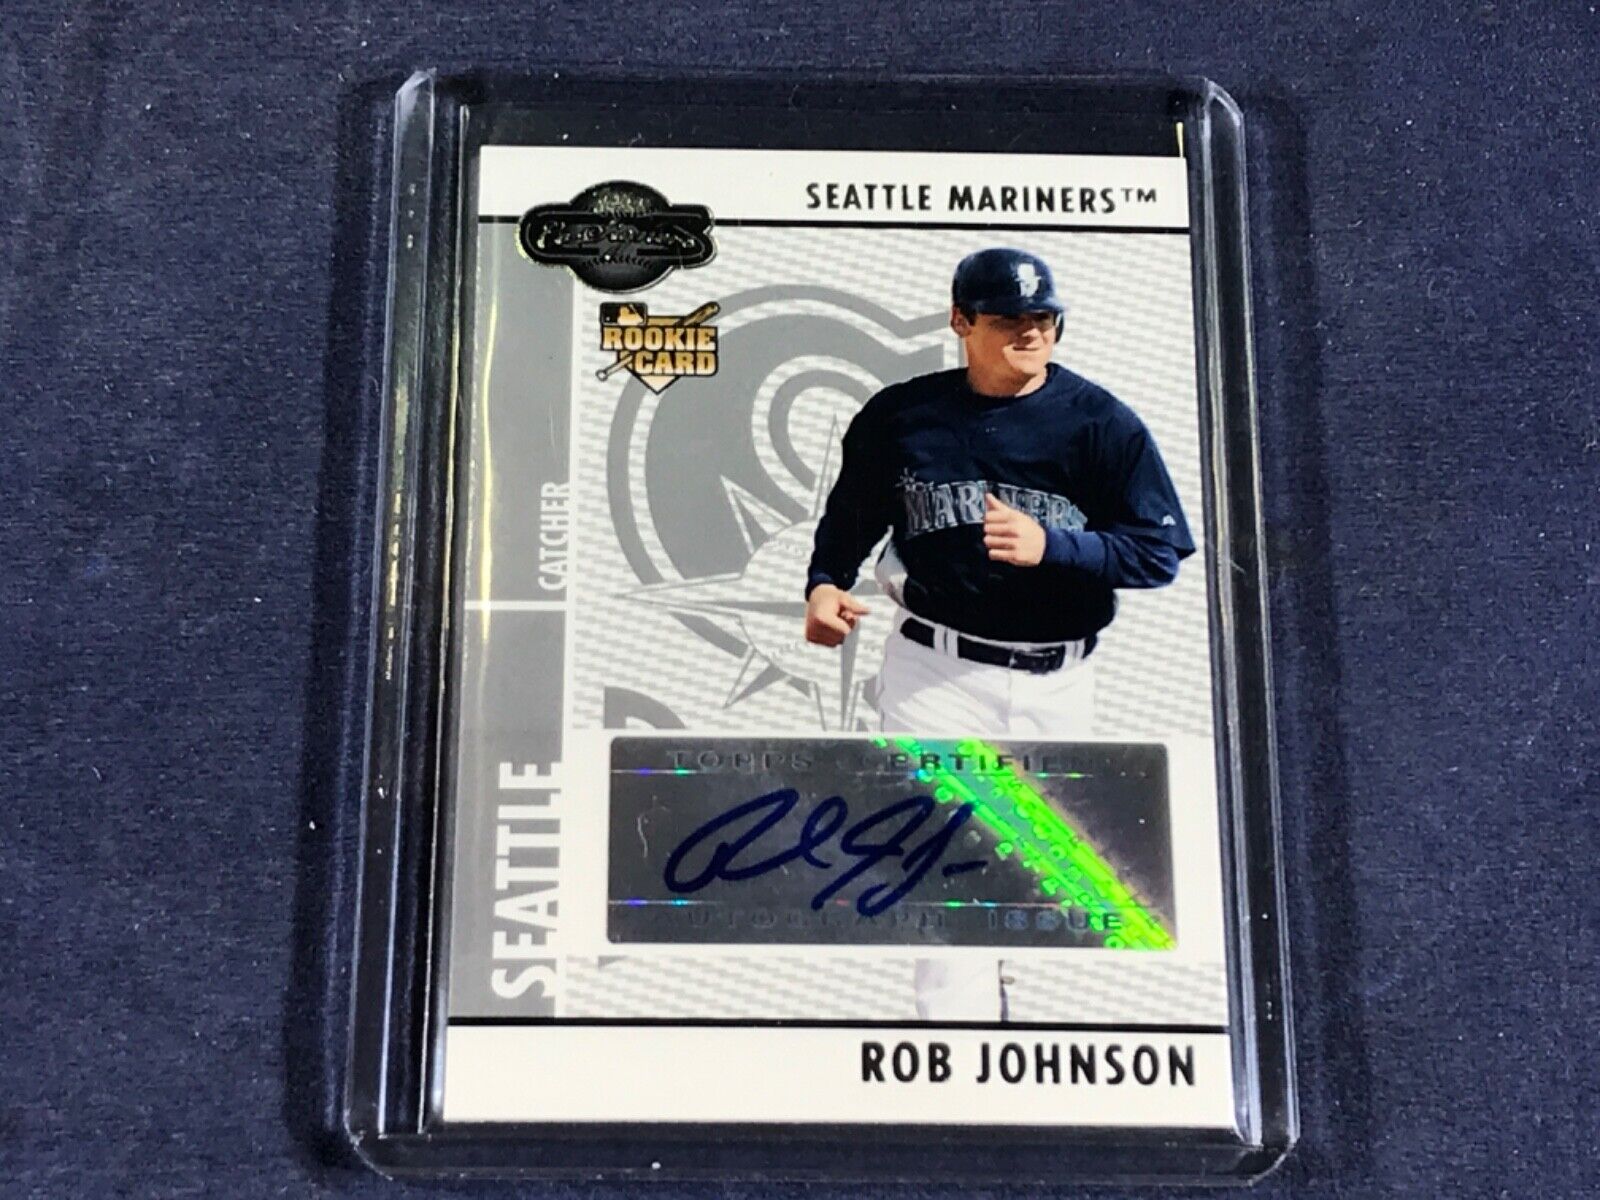 G3-29 BASEBALL CARD - ROB JOHNSON MARINERS ROOKIE - 2008 TOPPS - AUTOGRAPHED. rookie card picture